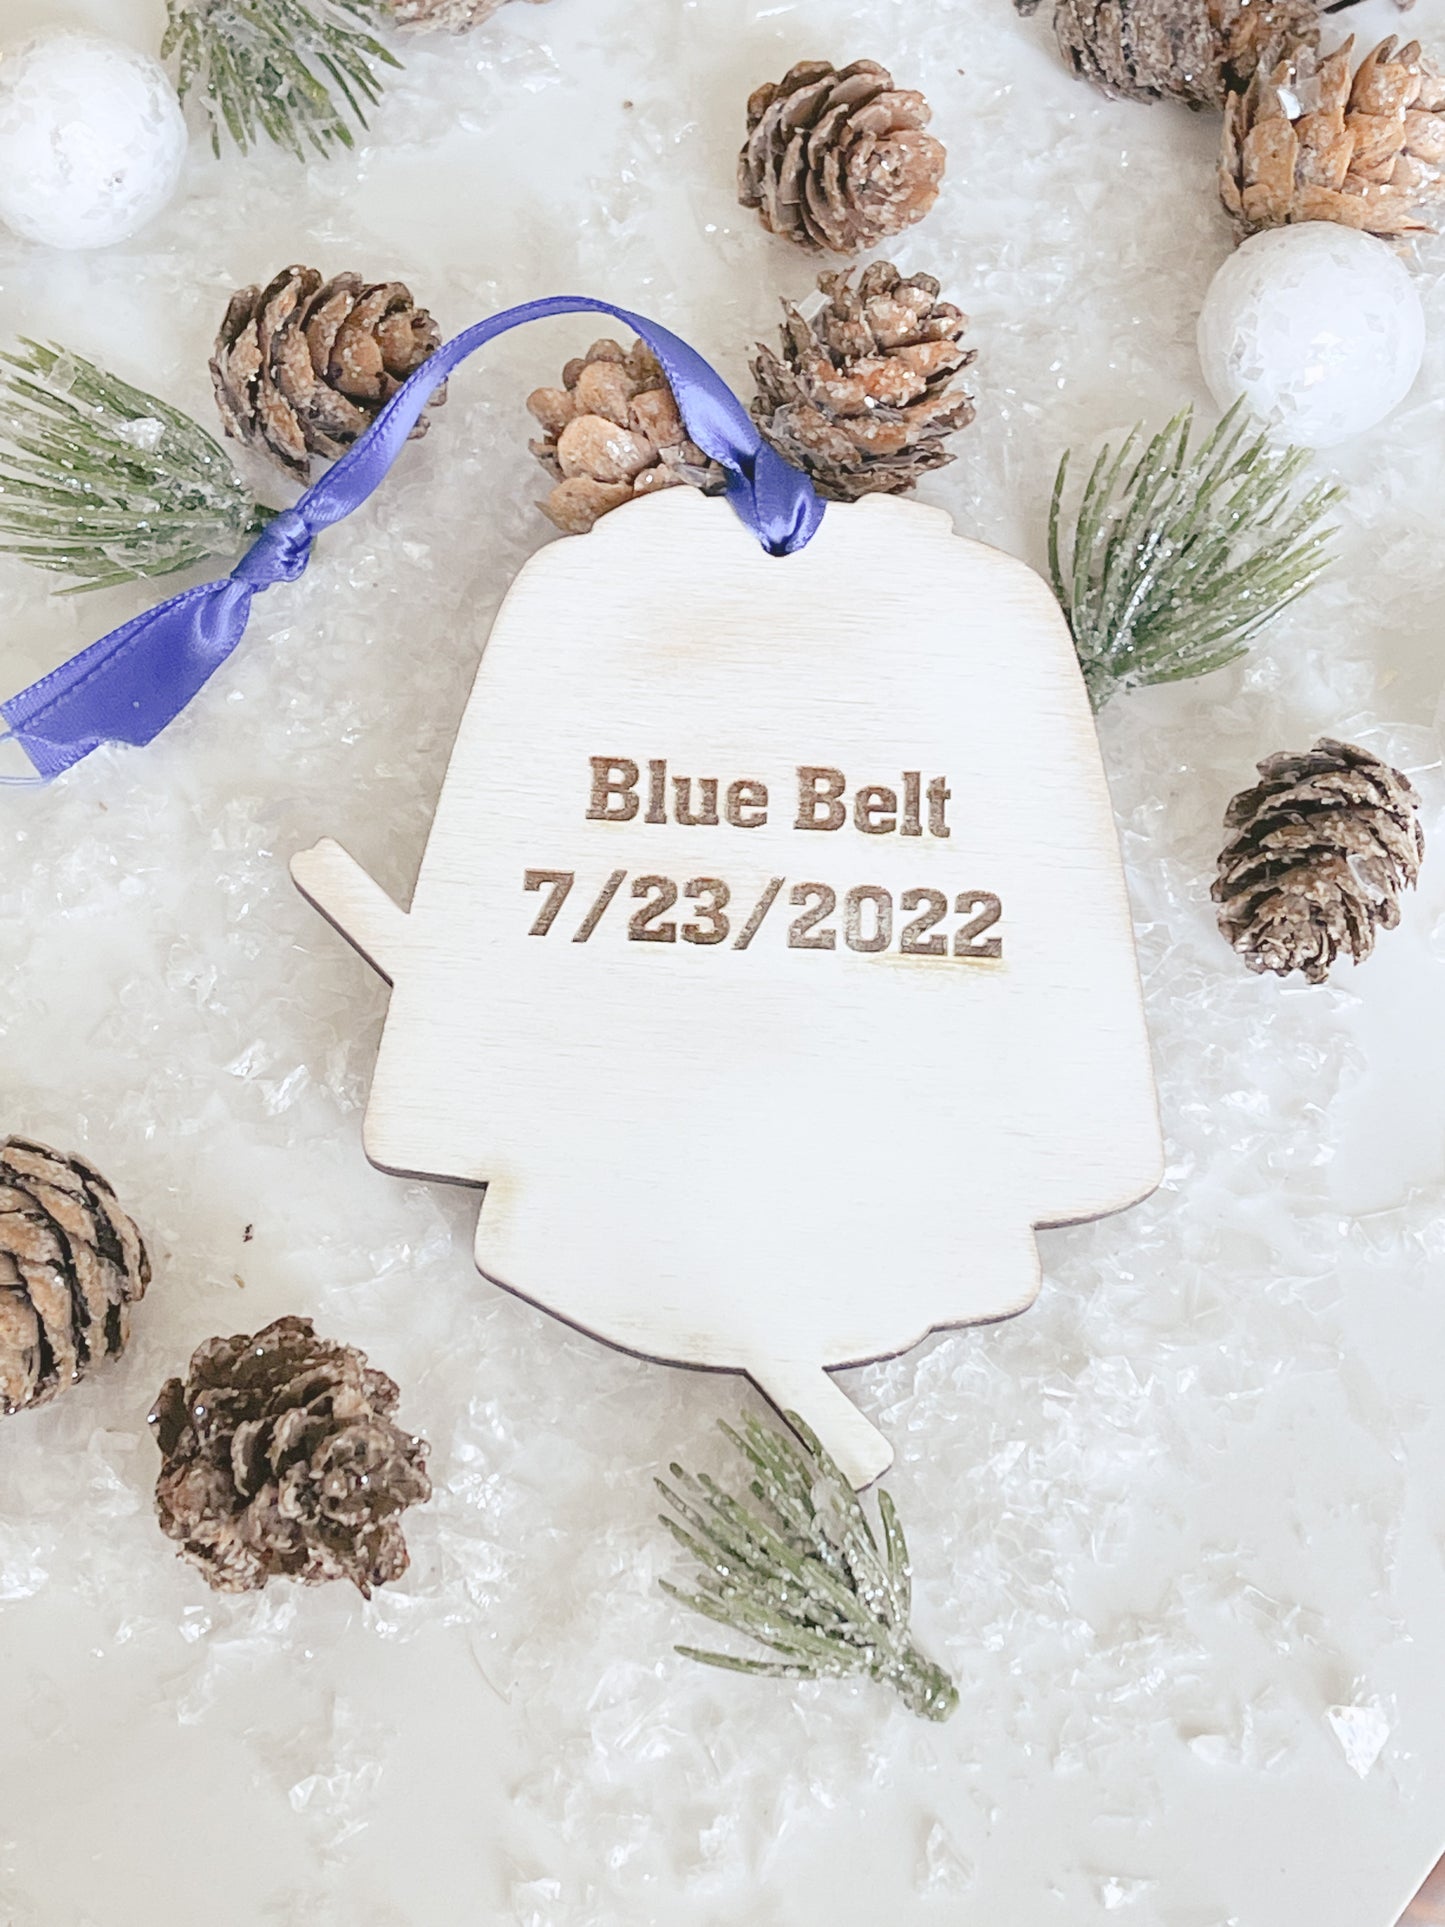 Personalized Karate Christmas Ornament